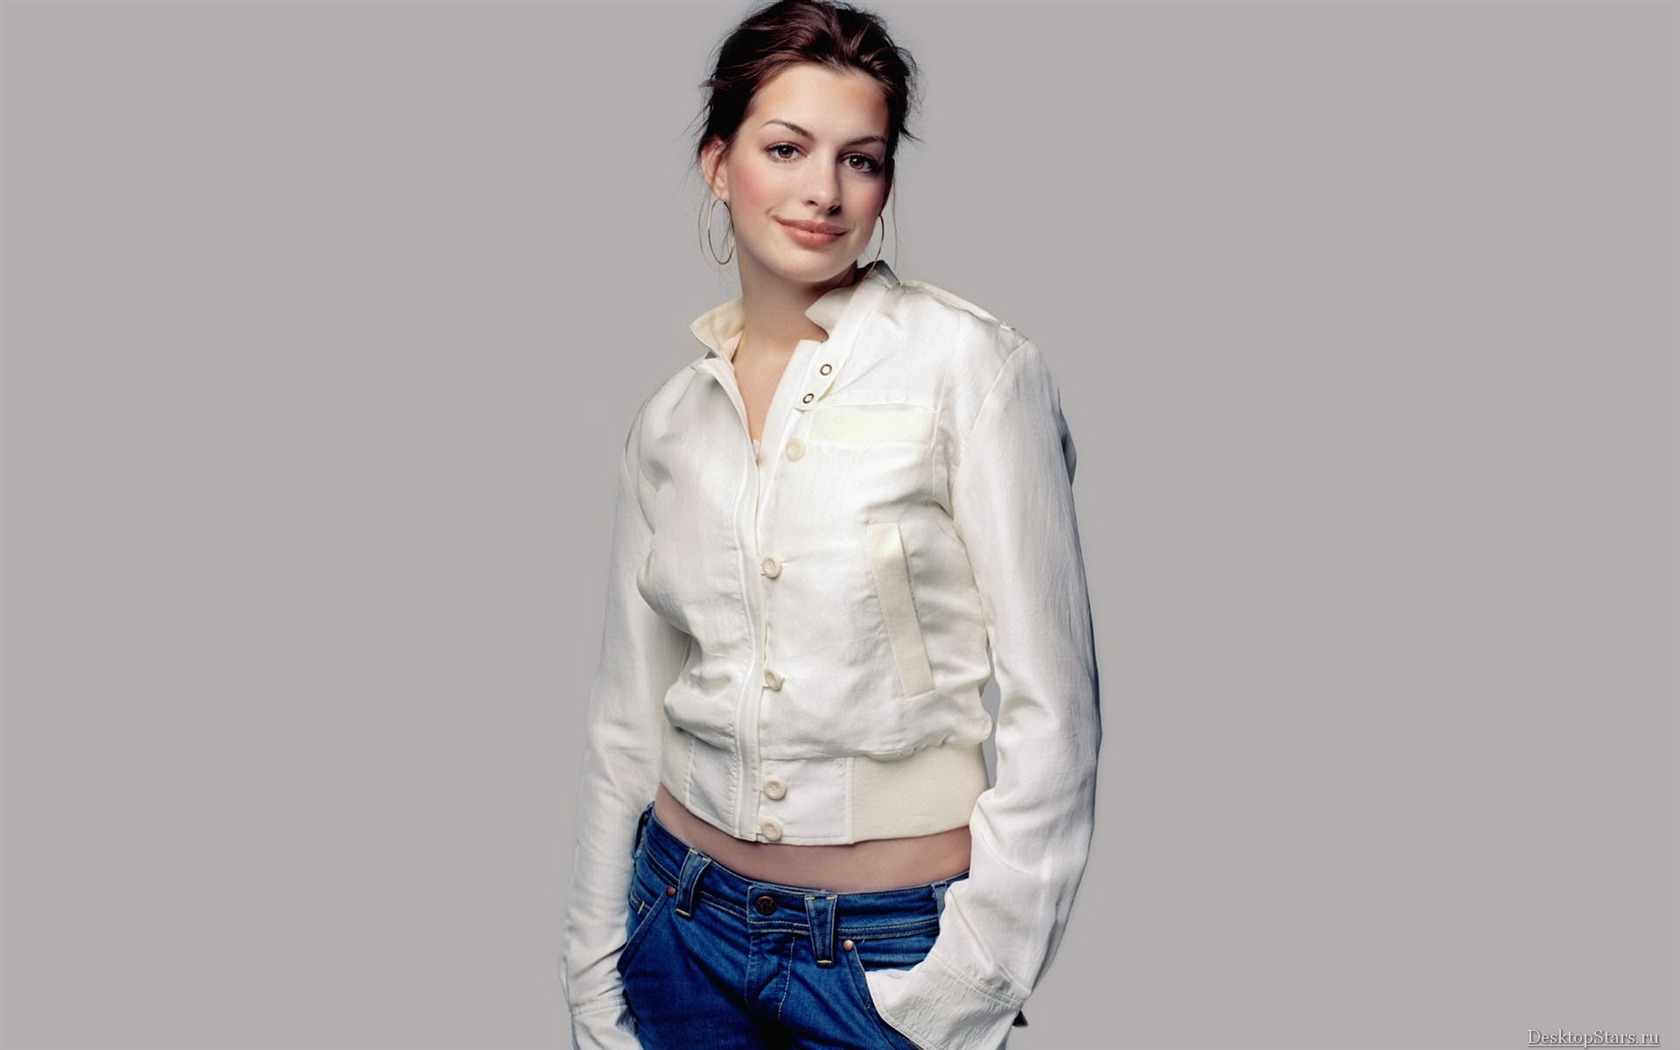 Anne Hathaway #015 - 1680x1050 Wallpapers Pictures Photos Images